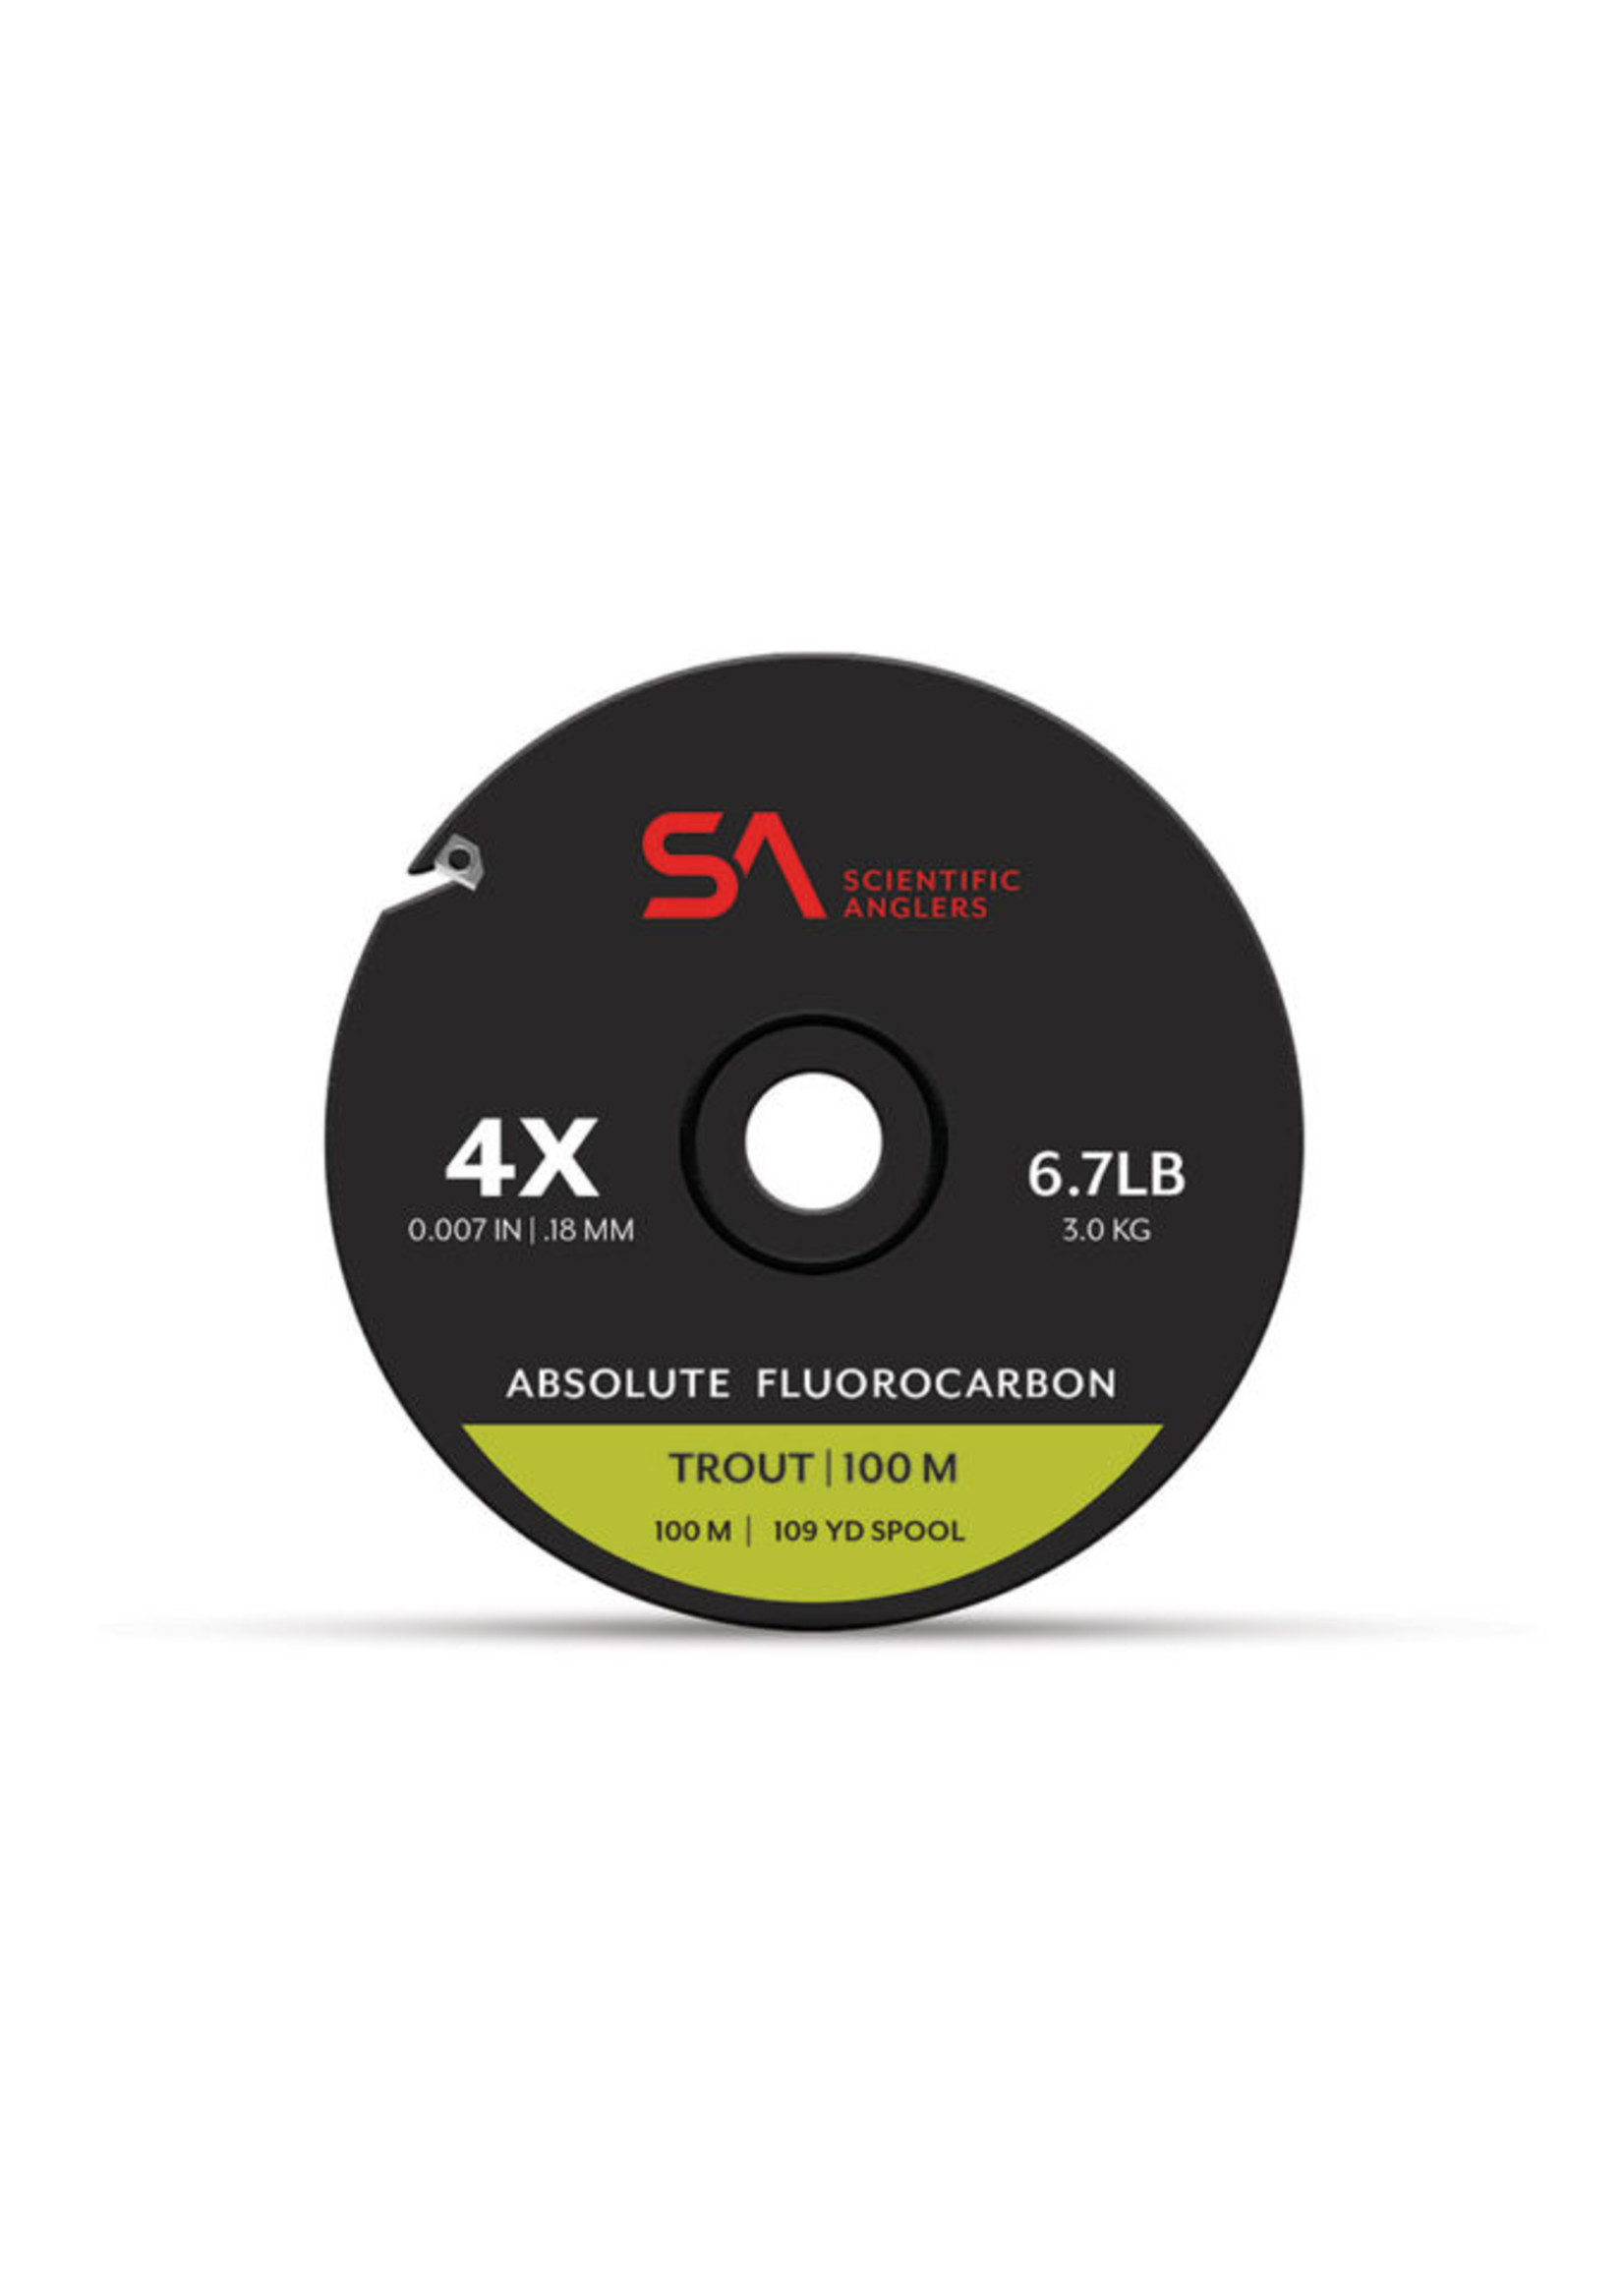 Scientific Anglers Scientific Anglers Absolute Fluorocarbon Trout 100m